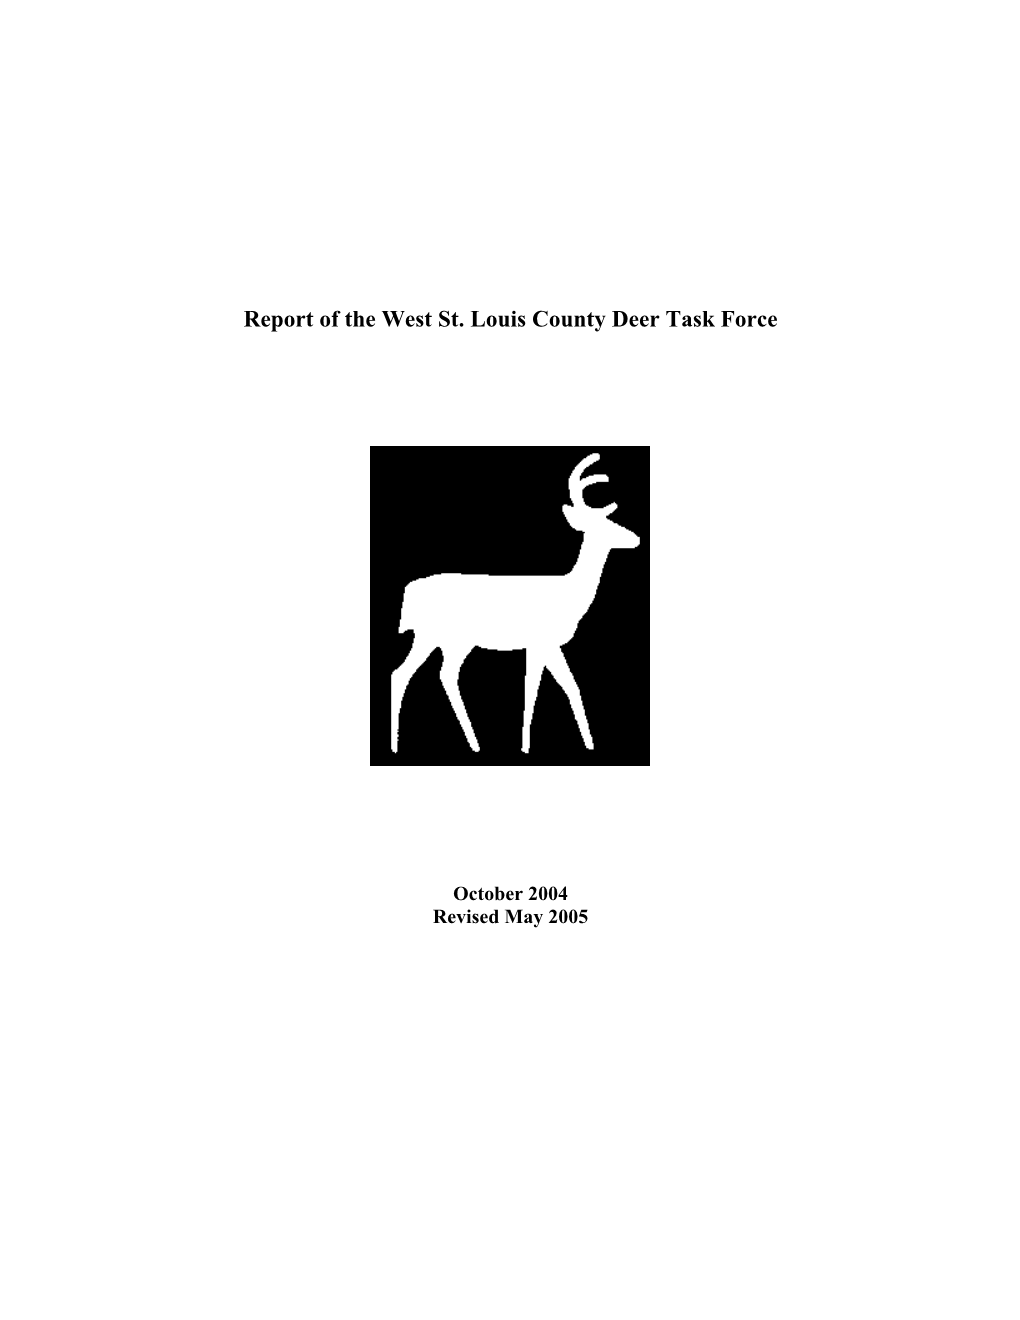 Report Ofthe West St. Louis County Deer Task Force